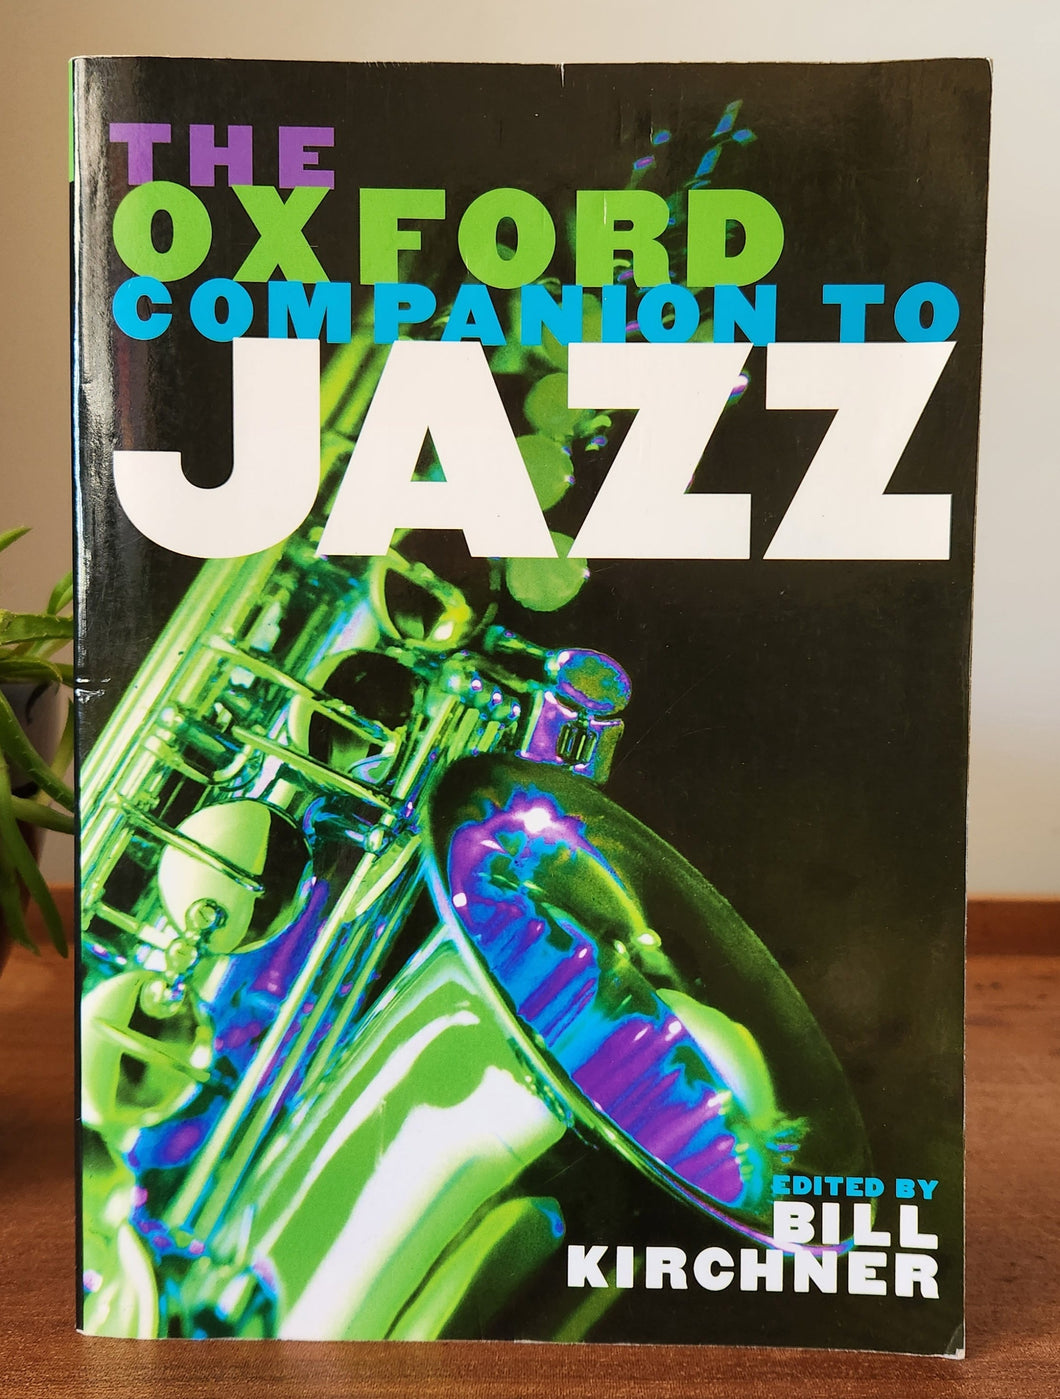 The Oxford Companion to Jazz Edited by Bill Kirchner